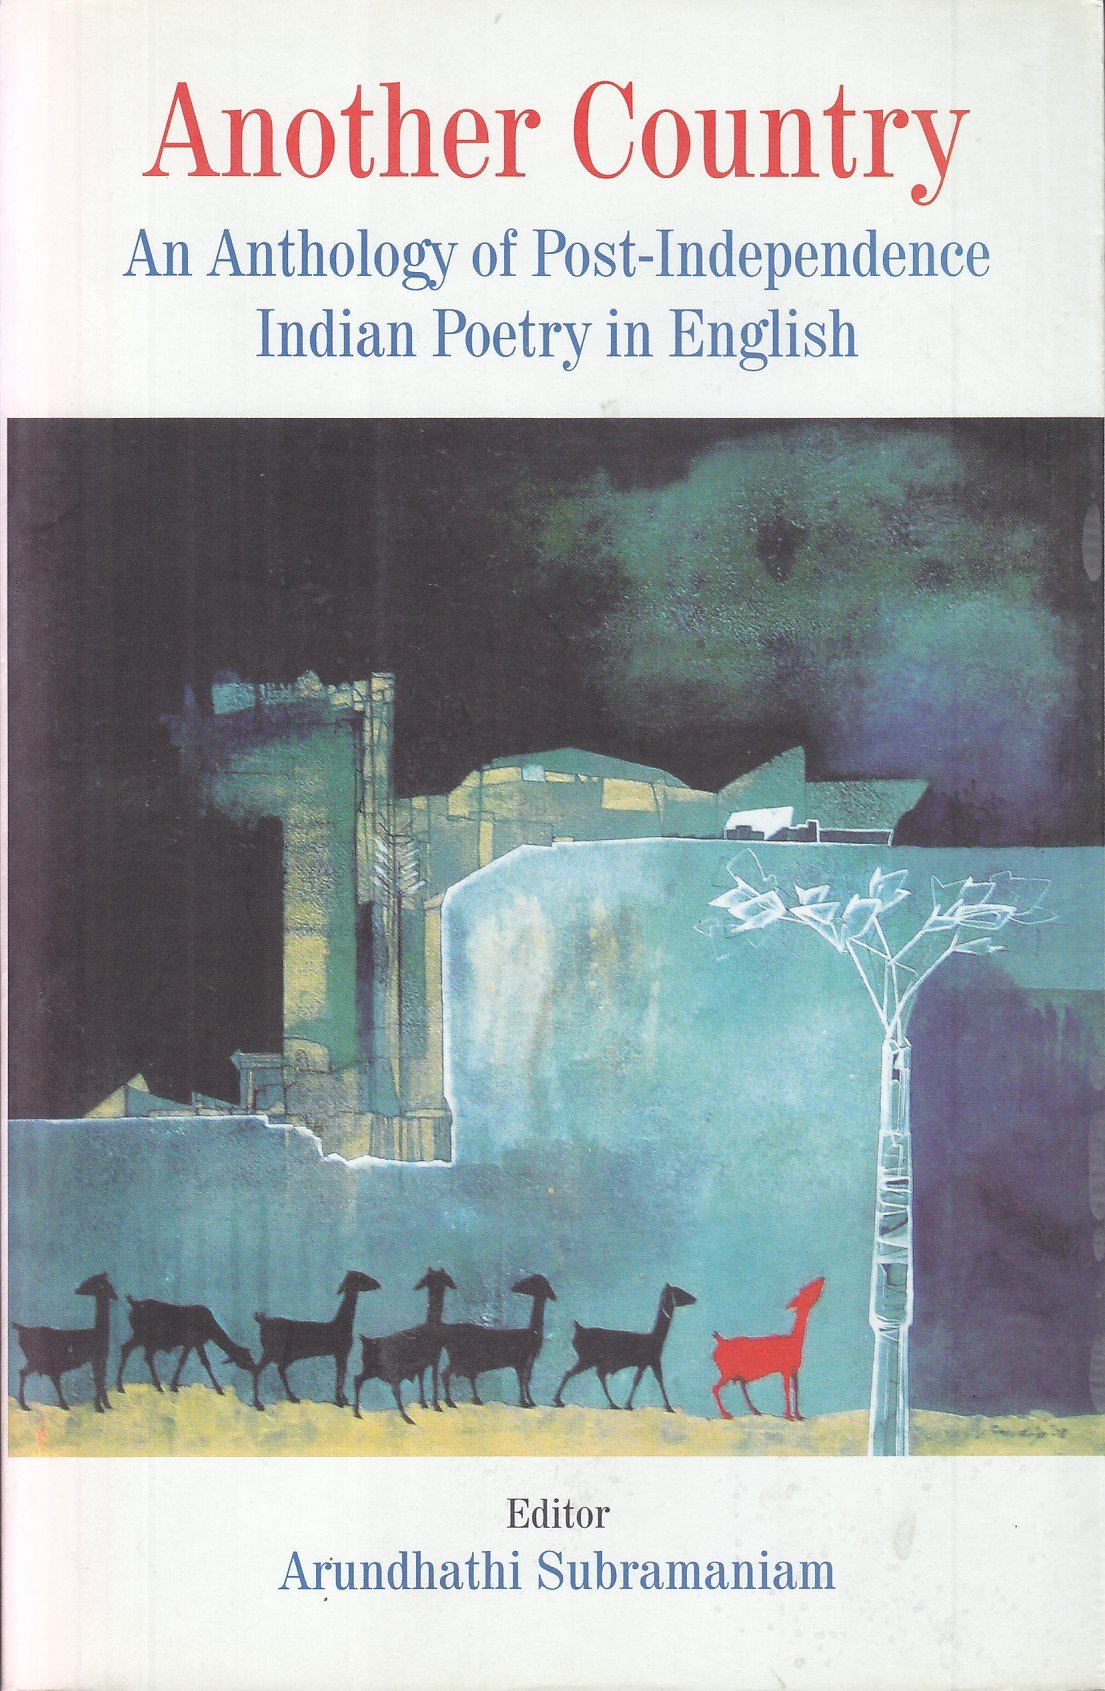 Another country: An Anthology Of Post-Independence Indian Poetry In English